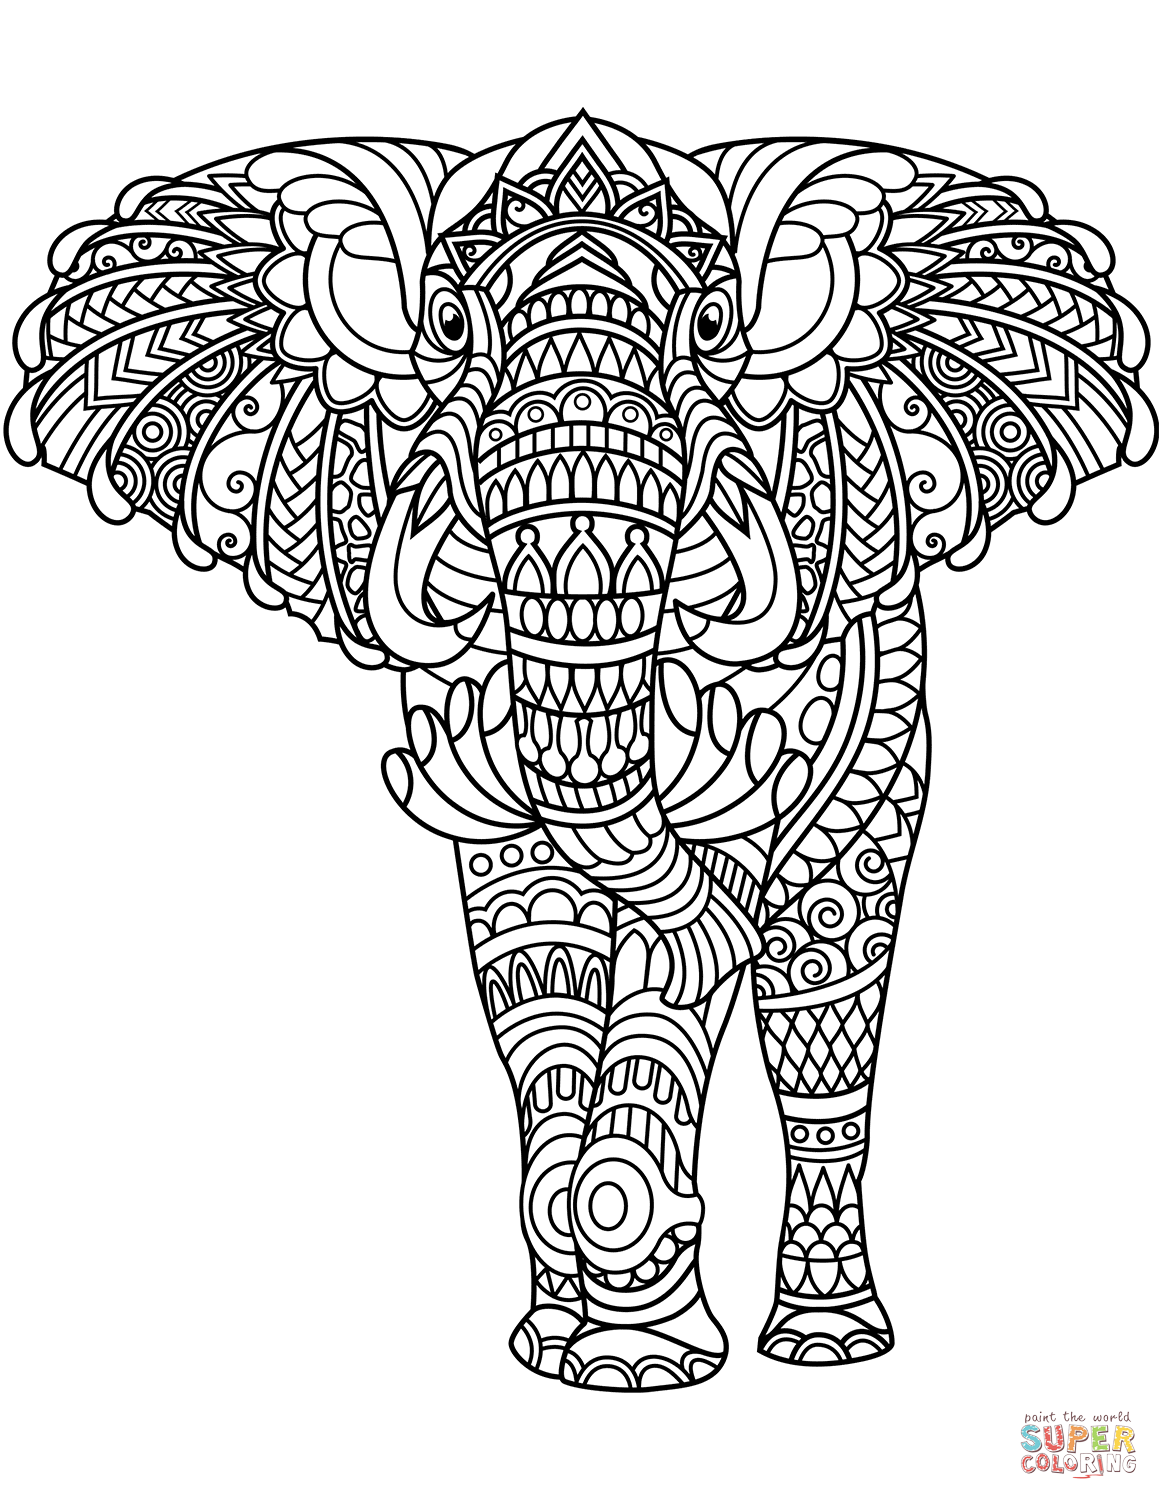 Elephant Zentangle coloring page | Free Printable Coloring Pages